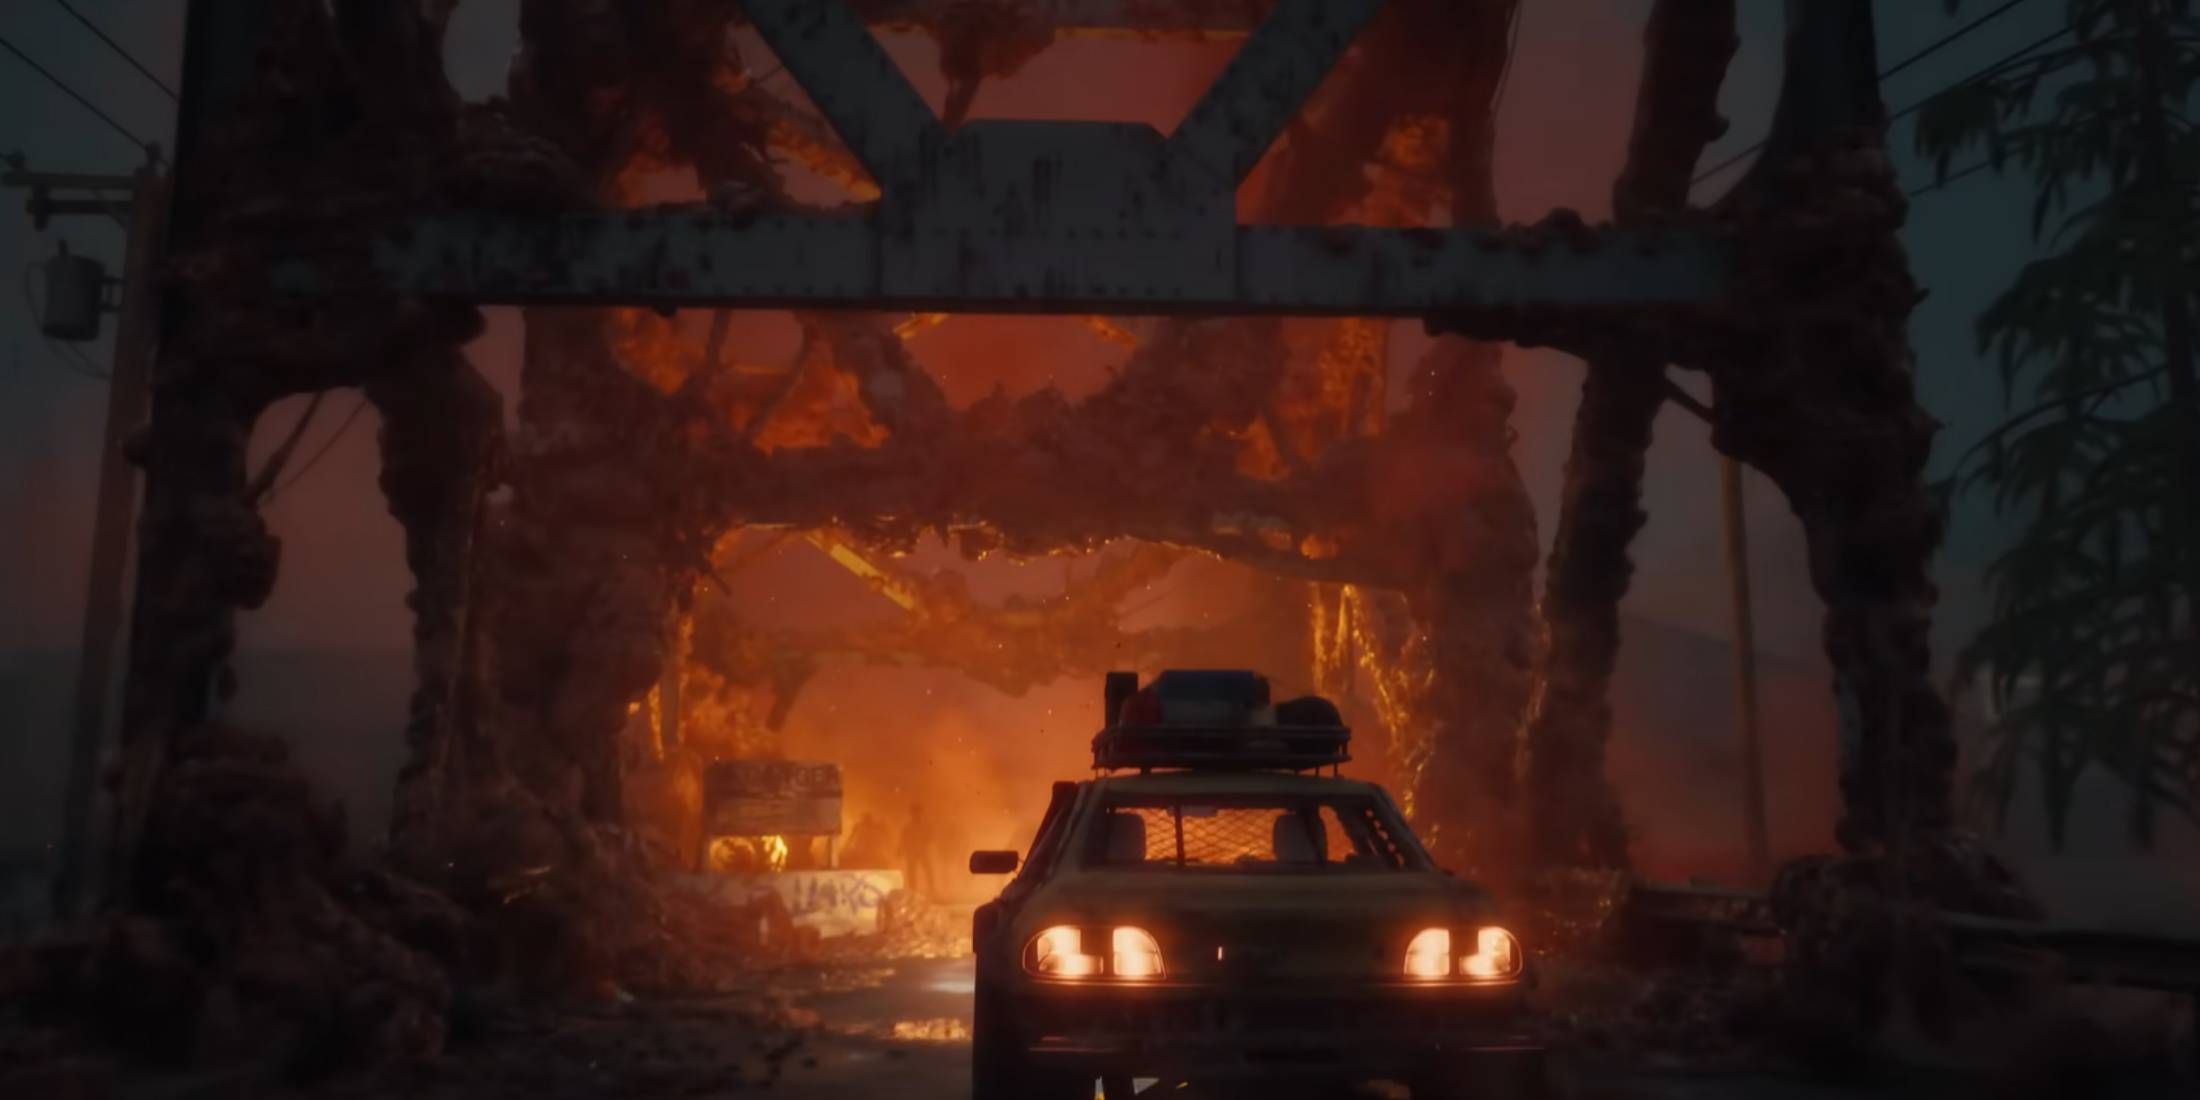 The survivors' car approaching a bridge in the State of Decay 3 trailer